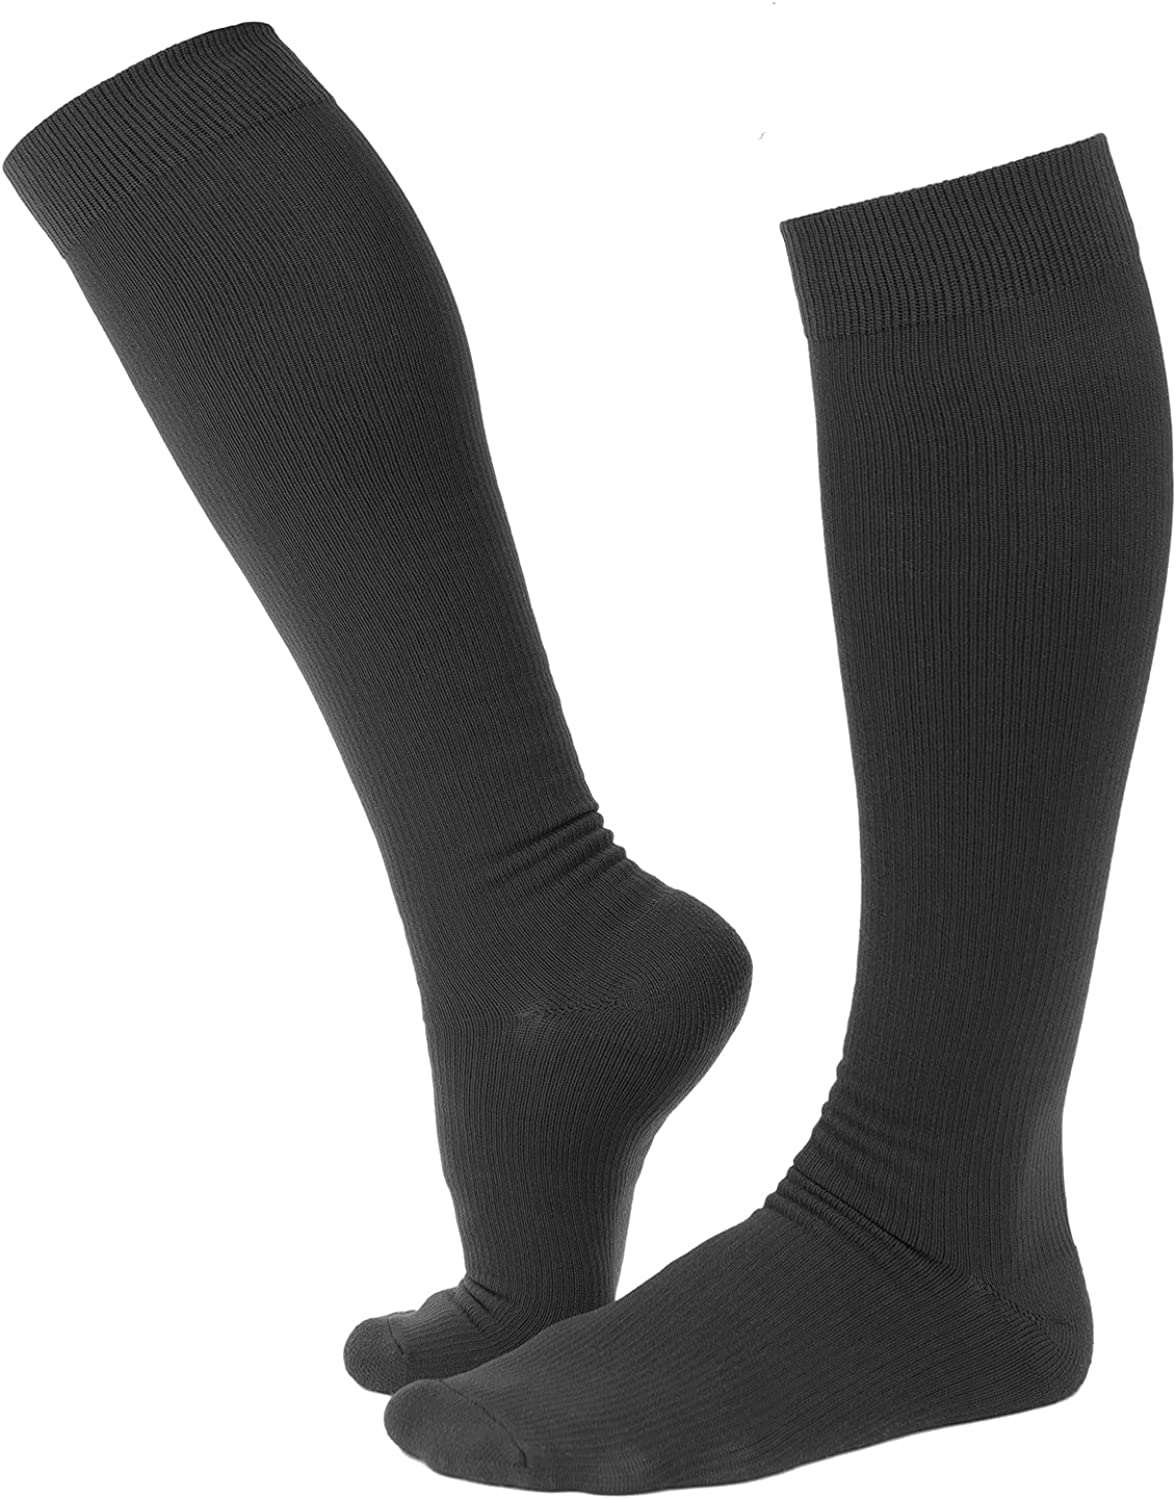 MDR Compression Socks Medical Knee High for Men & Women 20-30 mmHg 1 Pair Made in USA